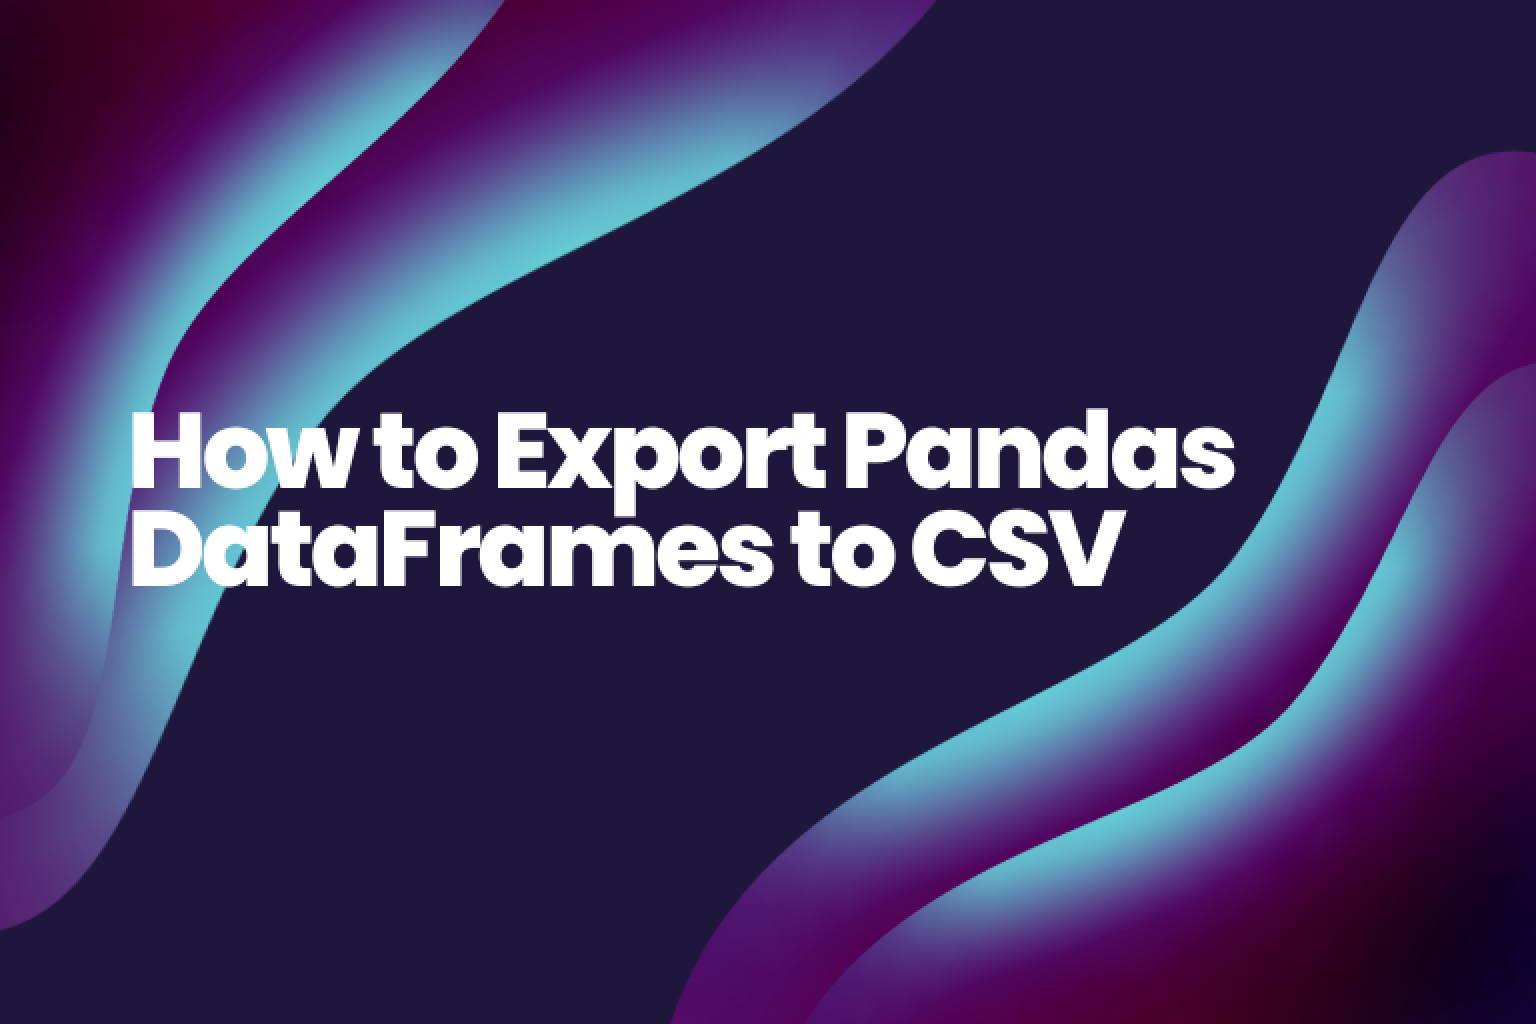 Learn how to export your data from pandas DataFrame to a CSV file with ease. A step-by-step guide to using the to csv function and its parameters.